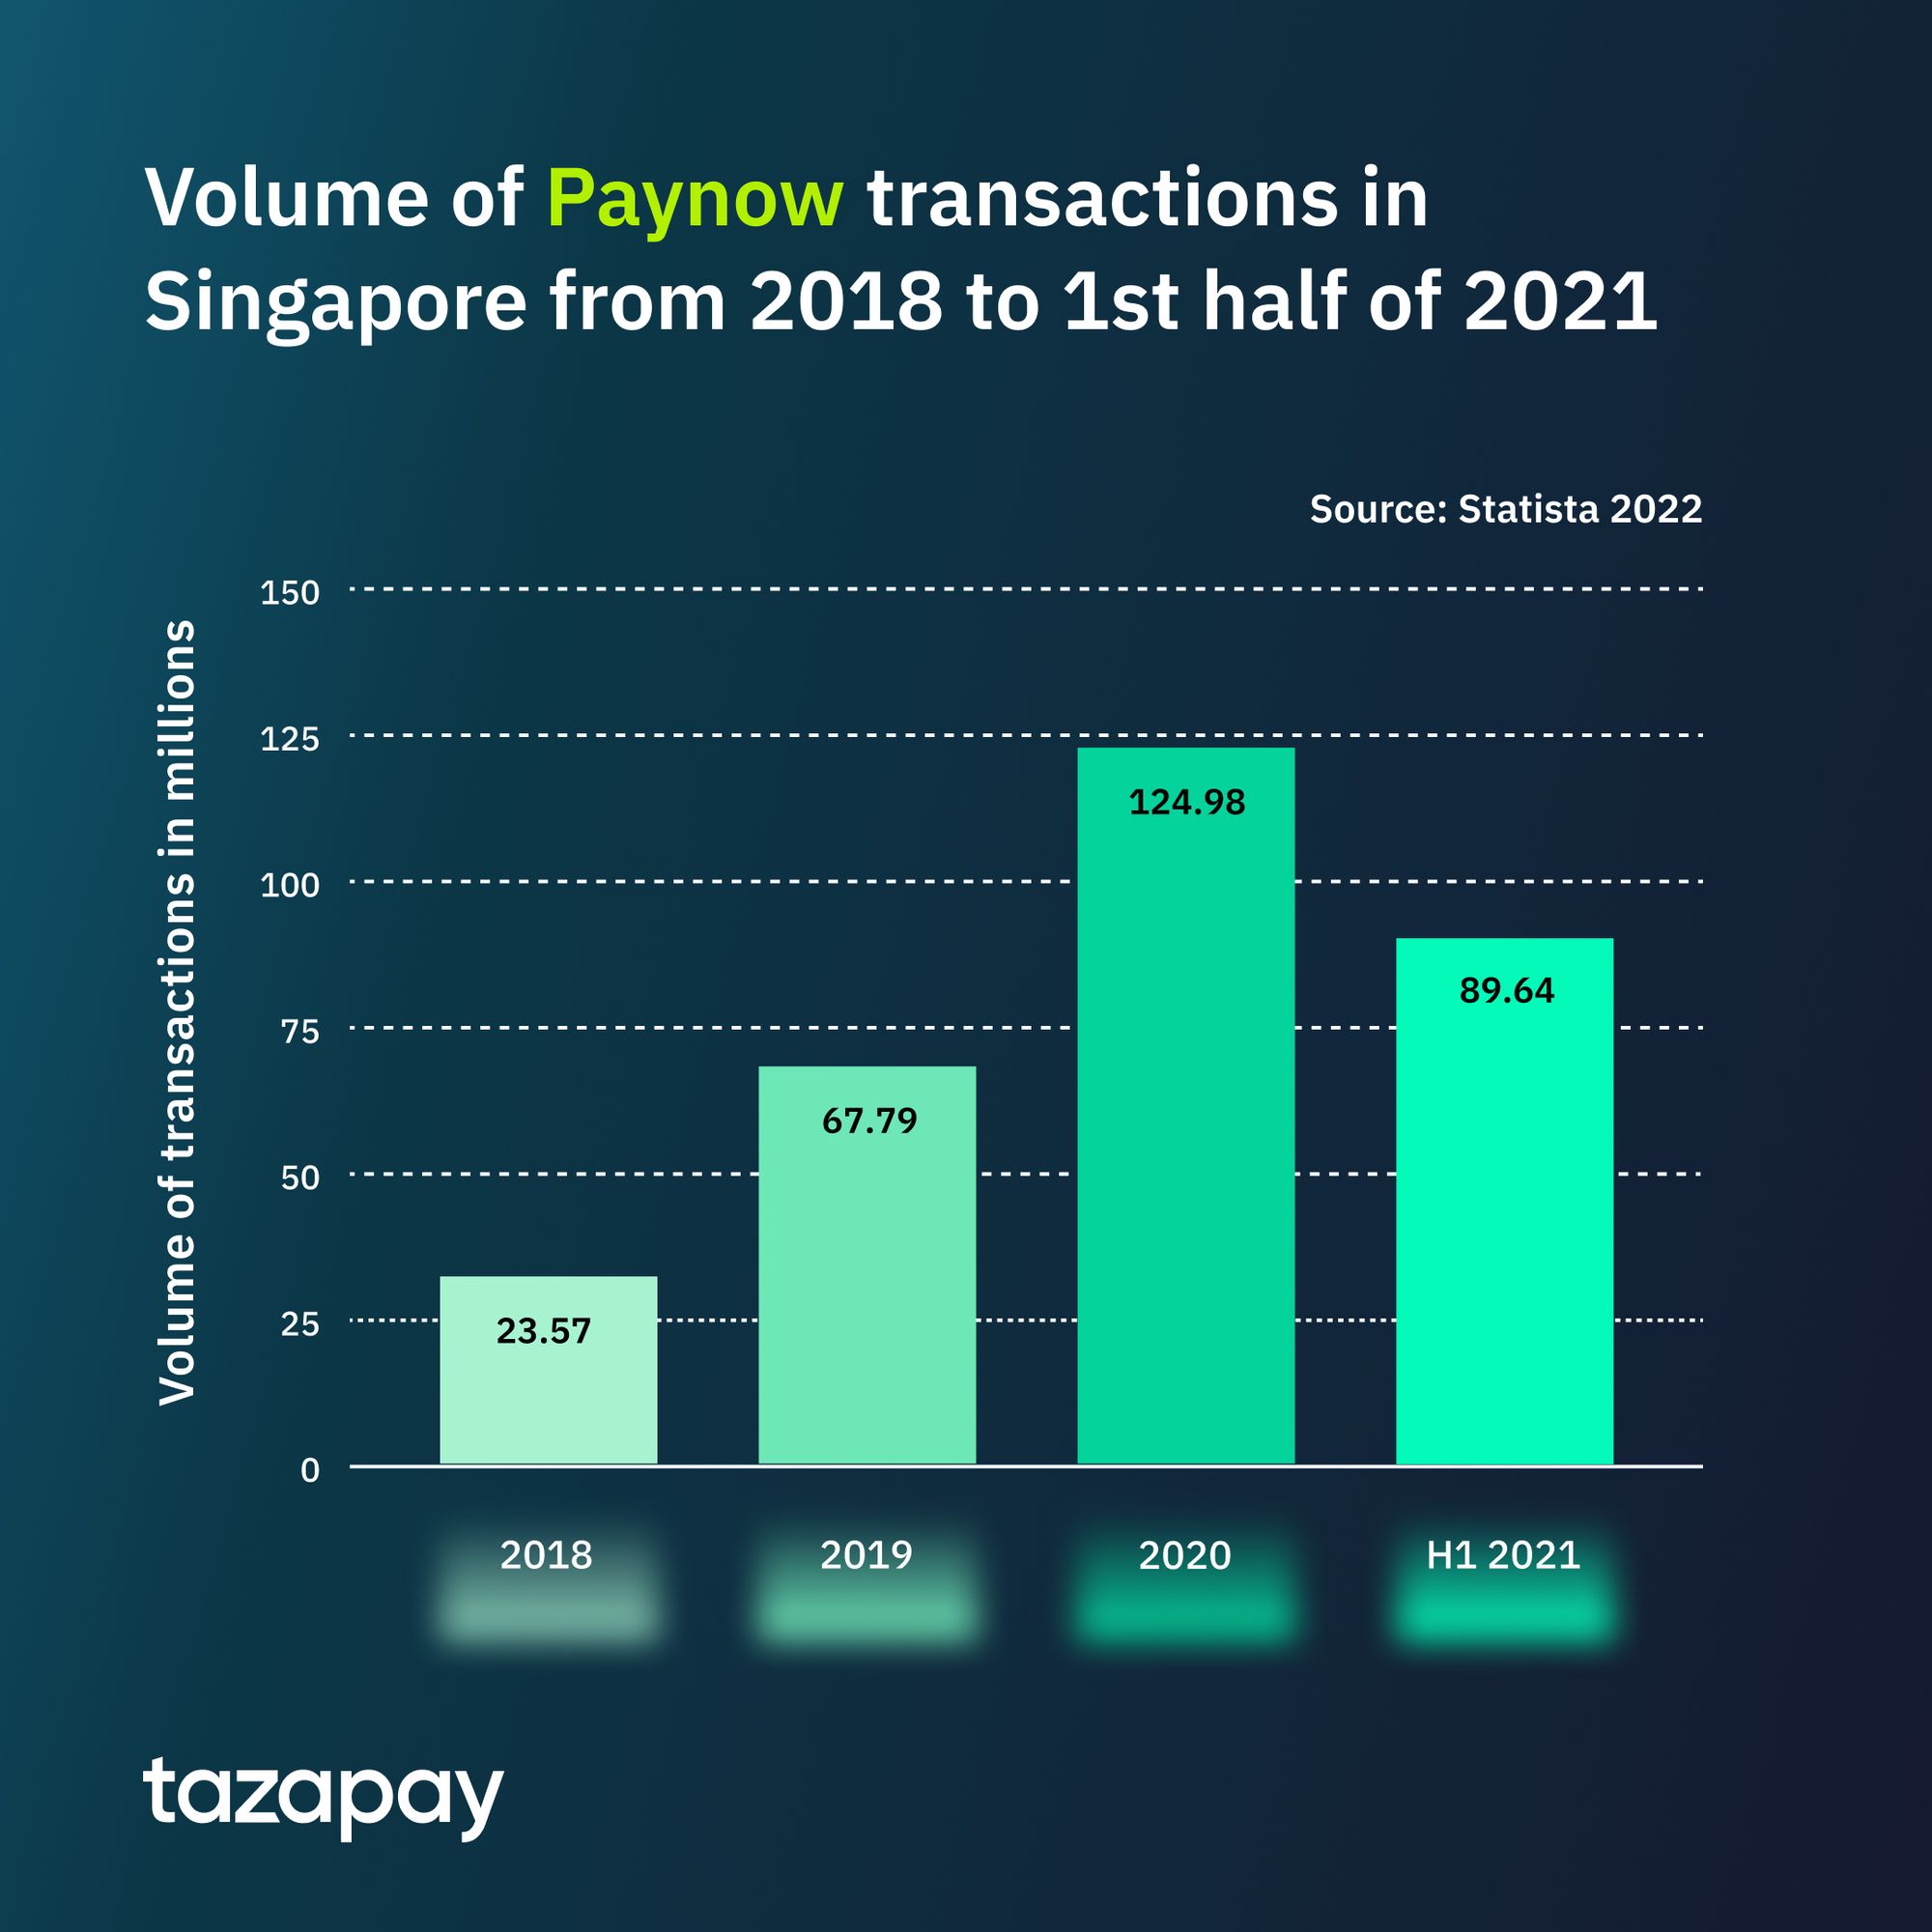 volume of Paynow transactions in Singapore from 2018 to H1 2021